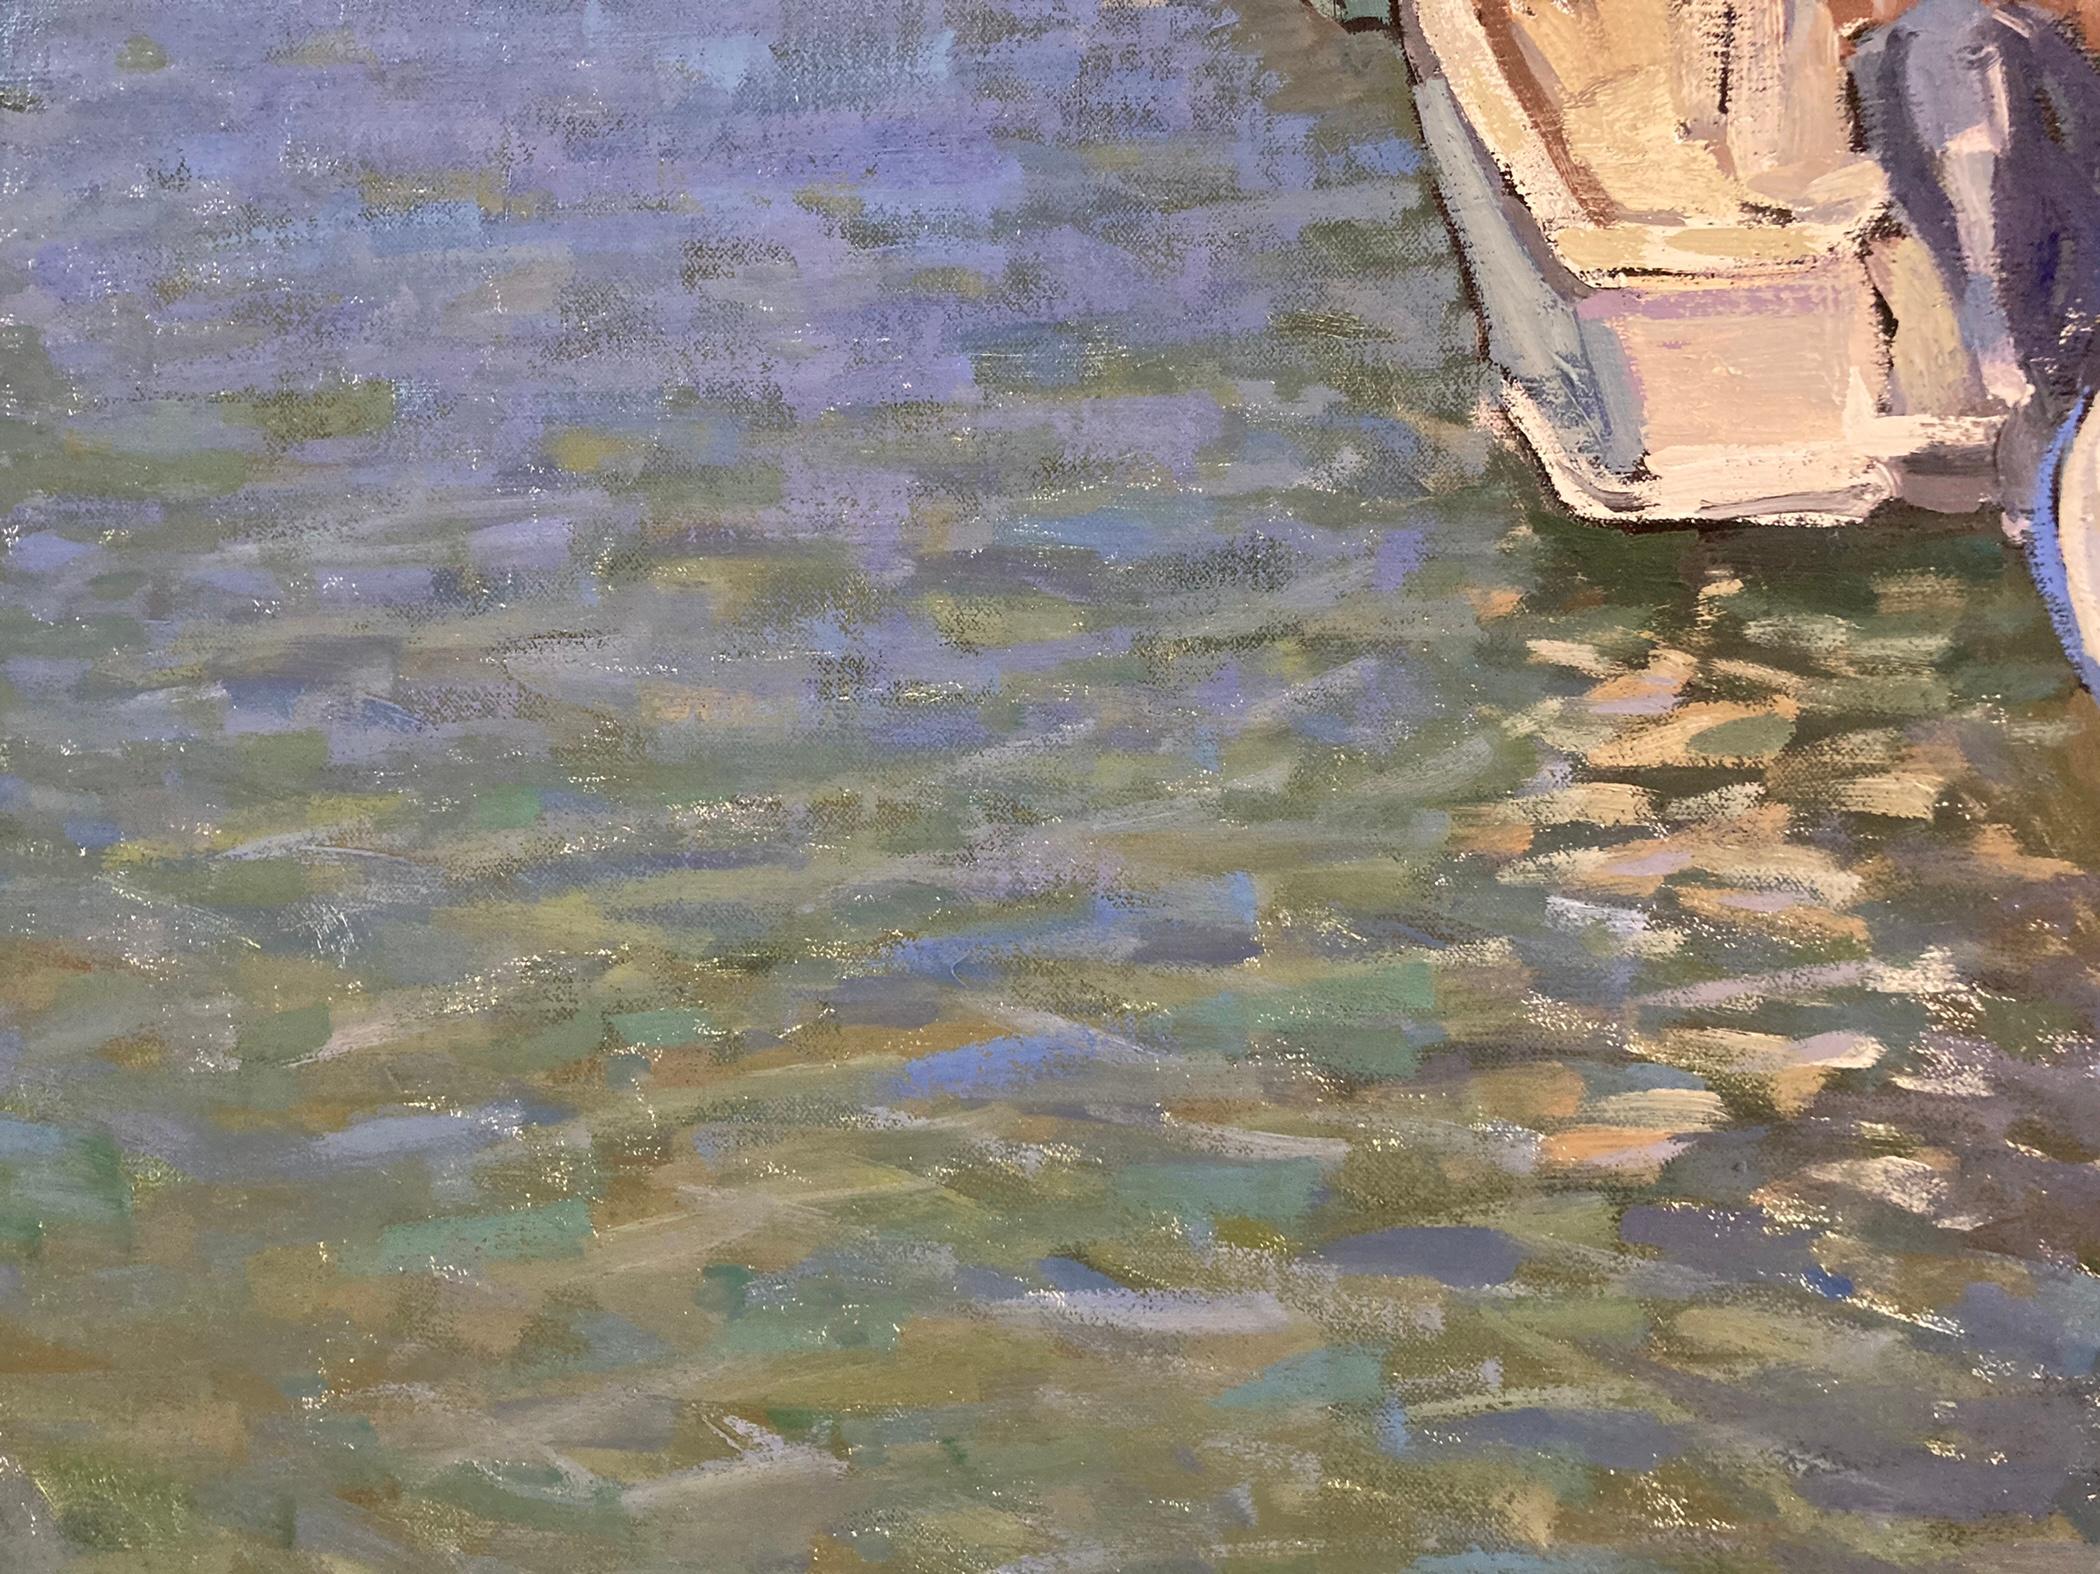 A painting of boats docked in a harbor. Loose brushstrokes in the lower lefthand corner indicate ripples in shallow water, shades of green and teal. The water becomes a deeper richer blue, with flecks of cerulean and periwinkle as it reaches the